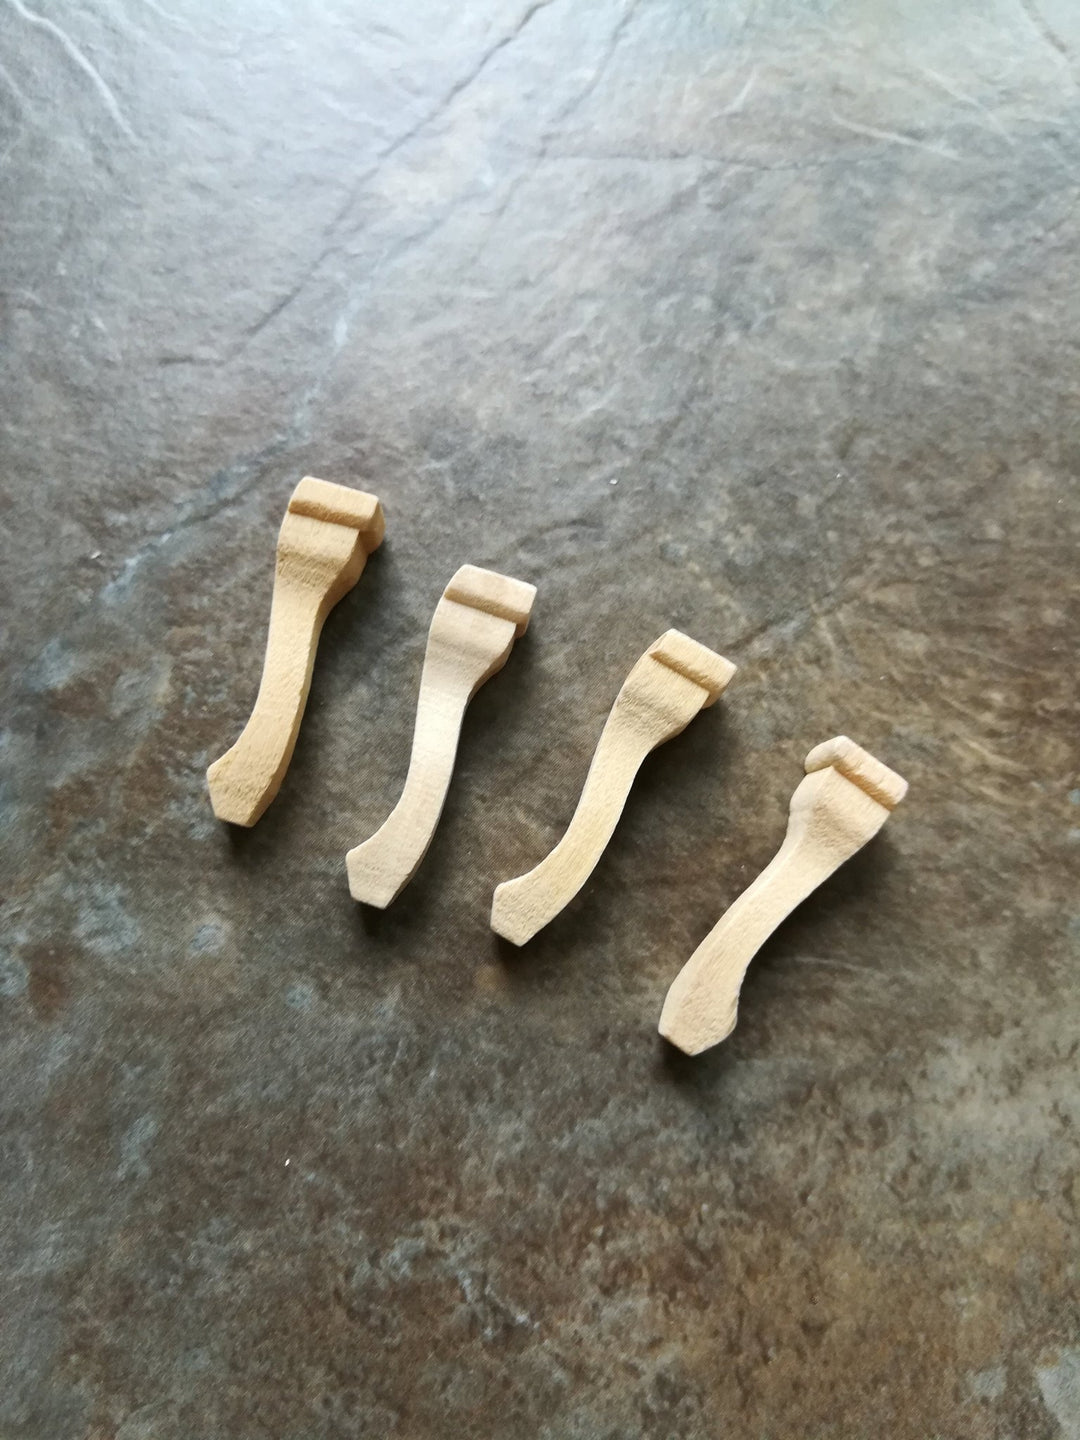 Dollhouse Miniature Wood Cabriole Legs for Chair or Furniture Set of 4 Pieces 1:12 Scale 3/8" - Miniature Crush